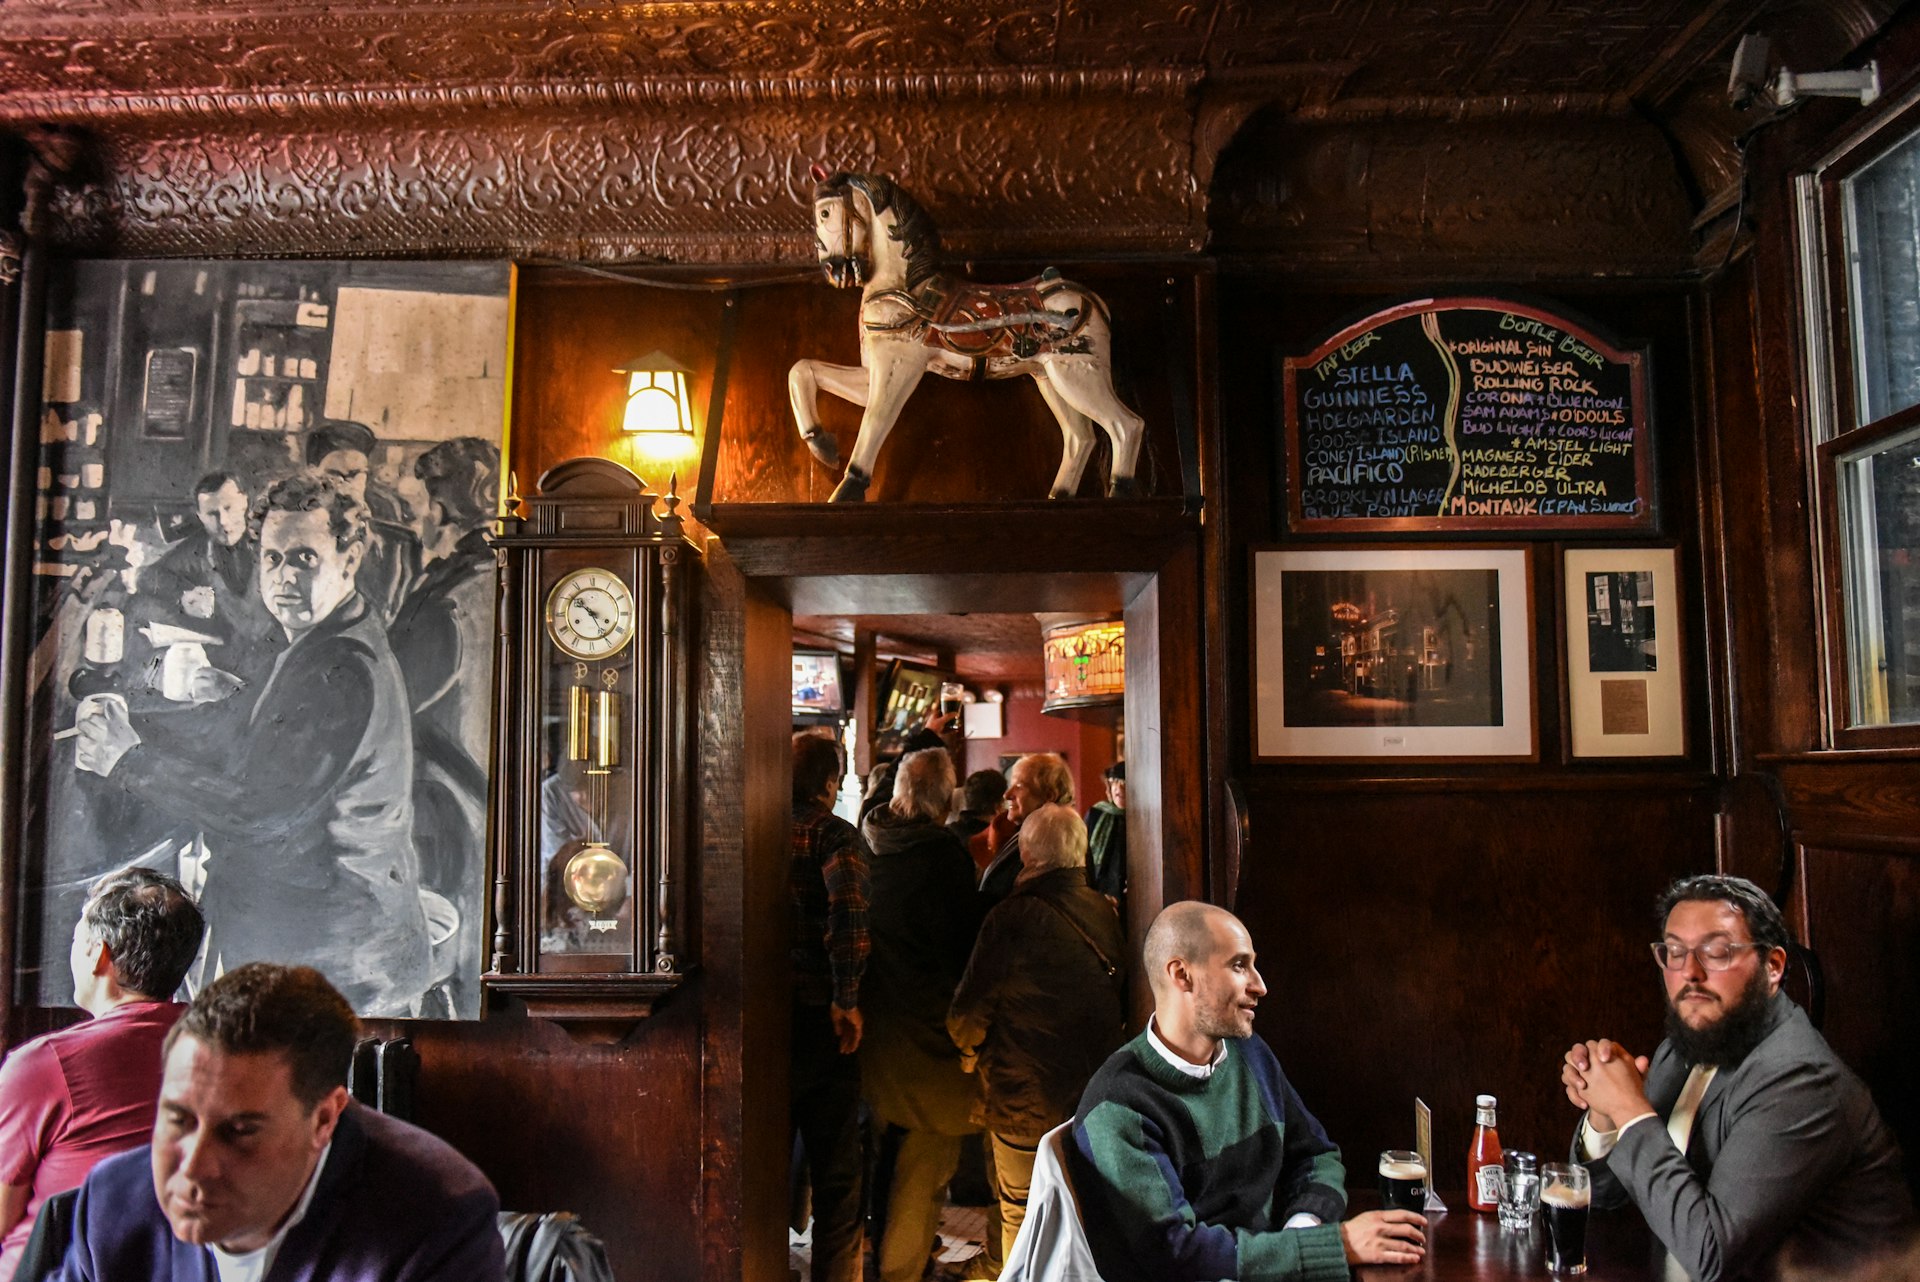 Patrons at the historic White Horse Tavern, West Village, New York City, New York, USA